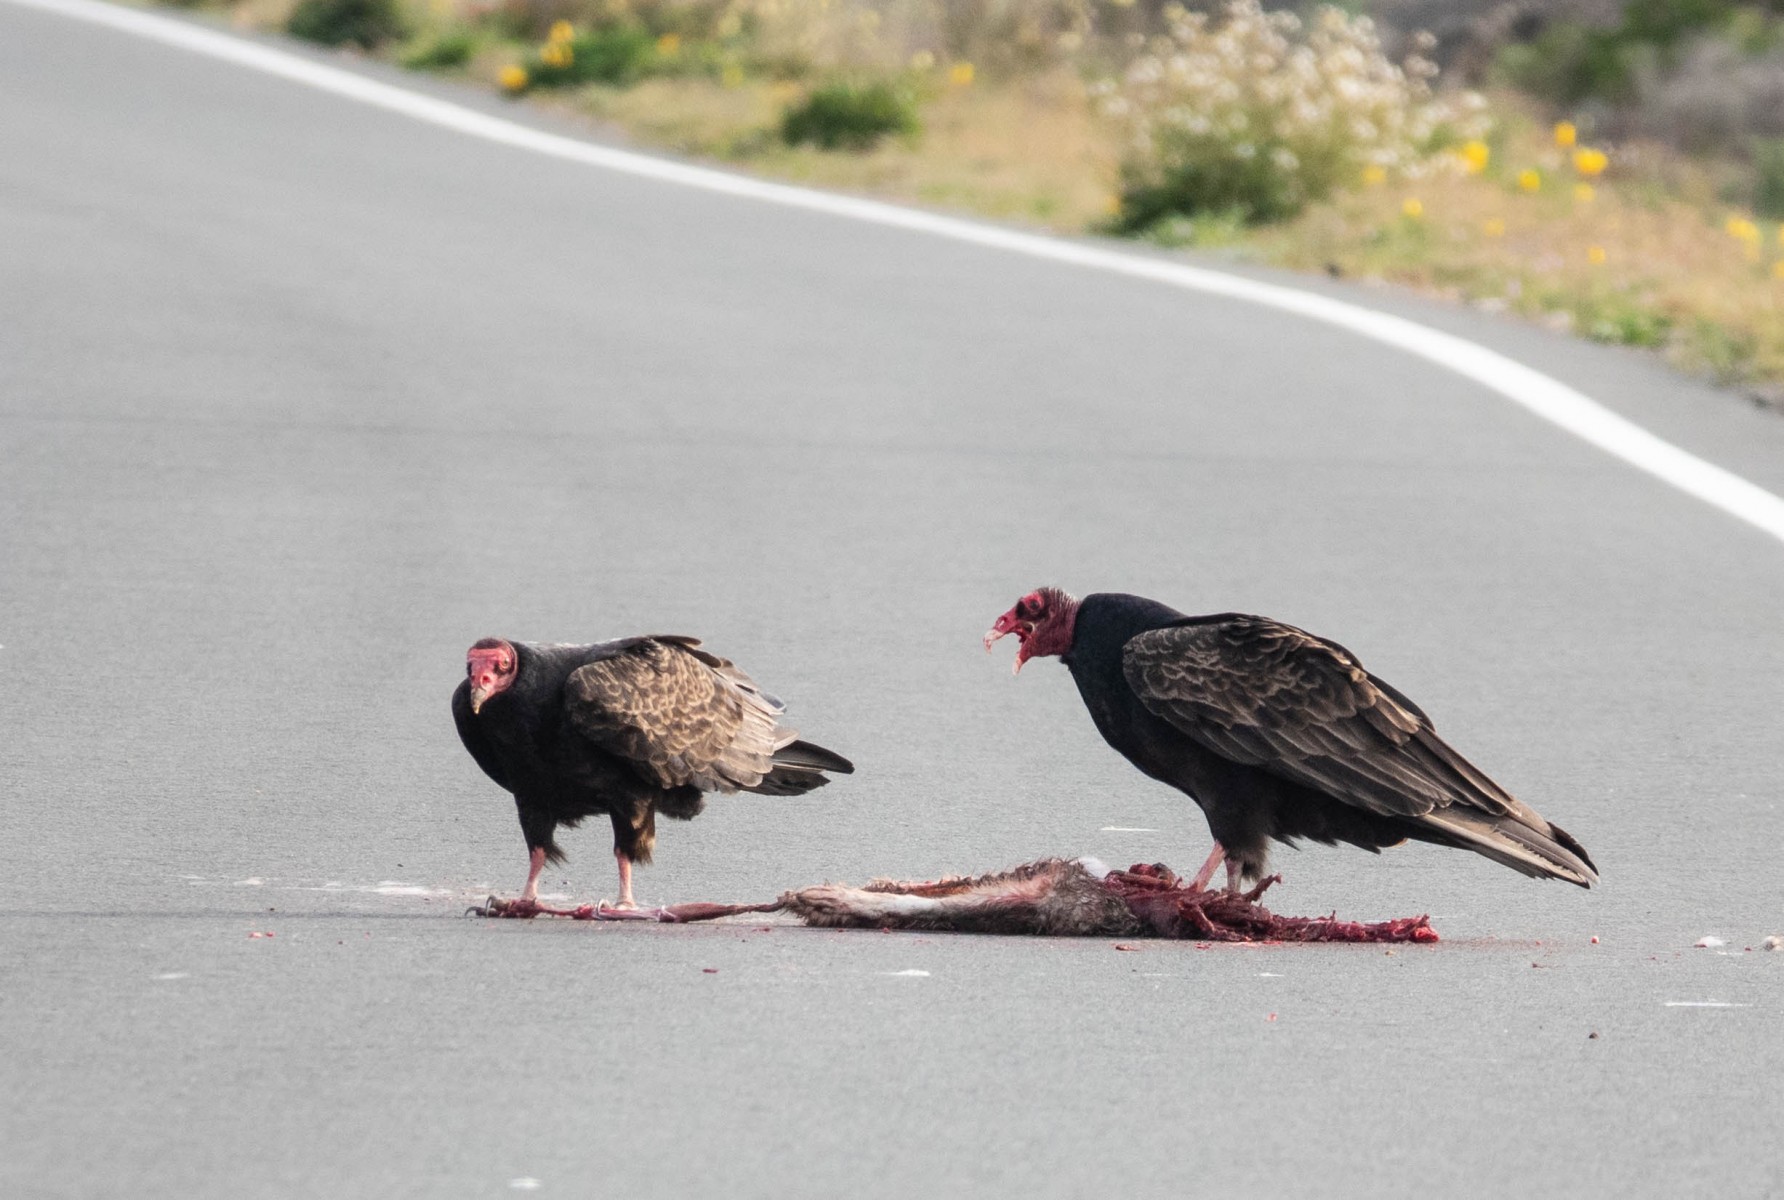 Turkey Vultures with a hare's hind leg...TMI?